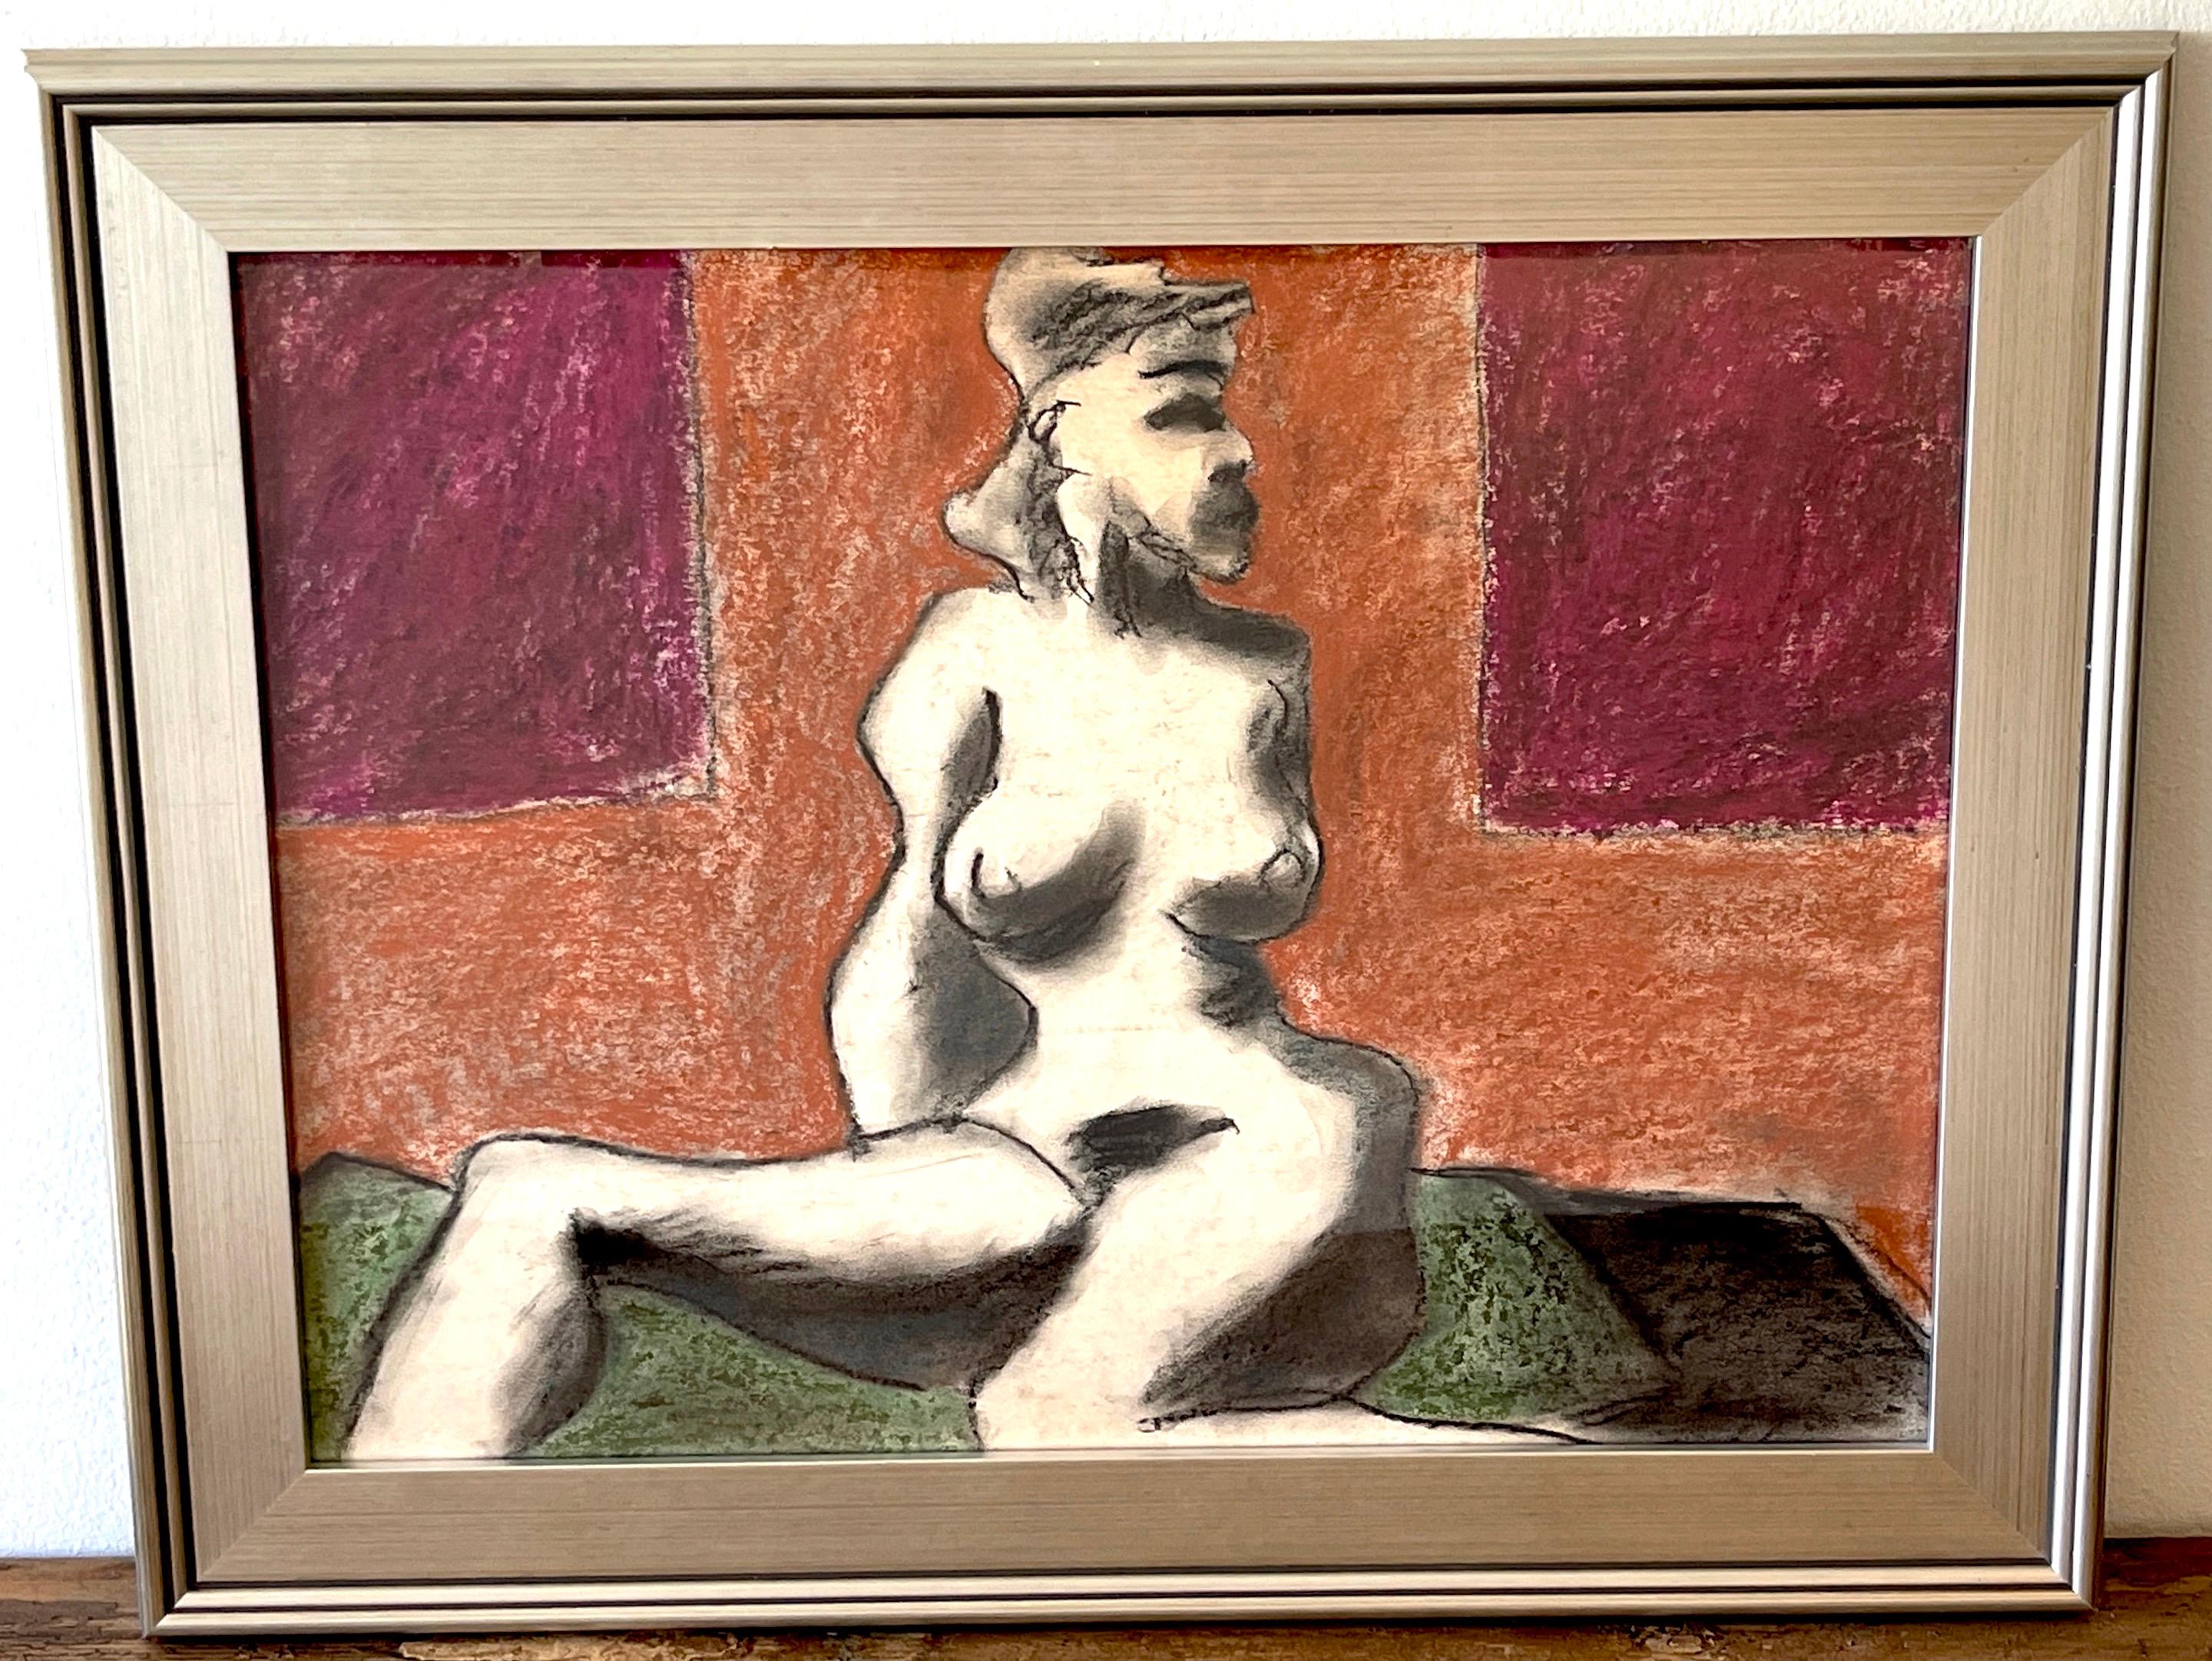 Modern 'Seated Female Nude' Oil/Mixed Media on Paper, 1960s by Douglas D. Peden For Sale